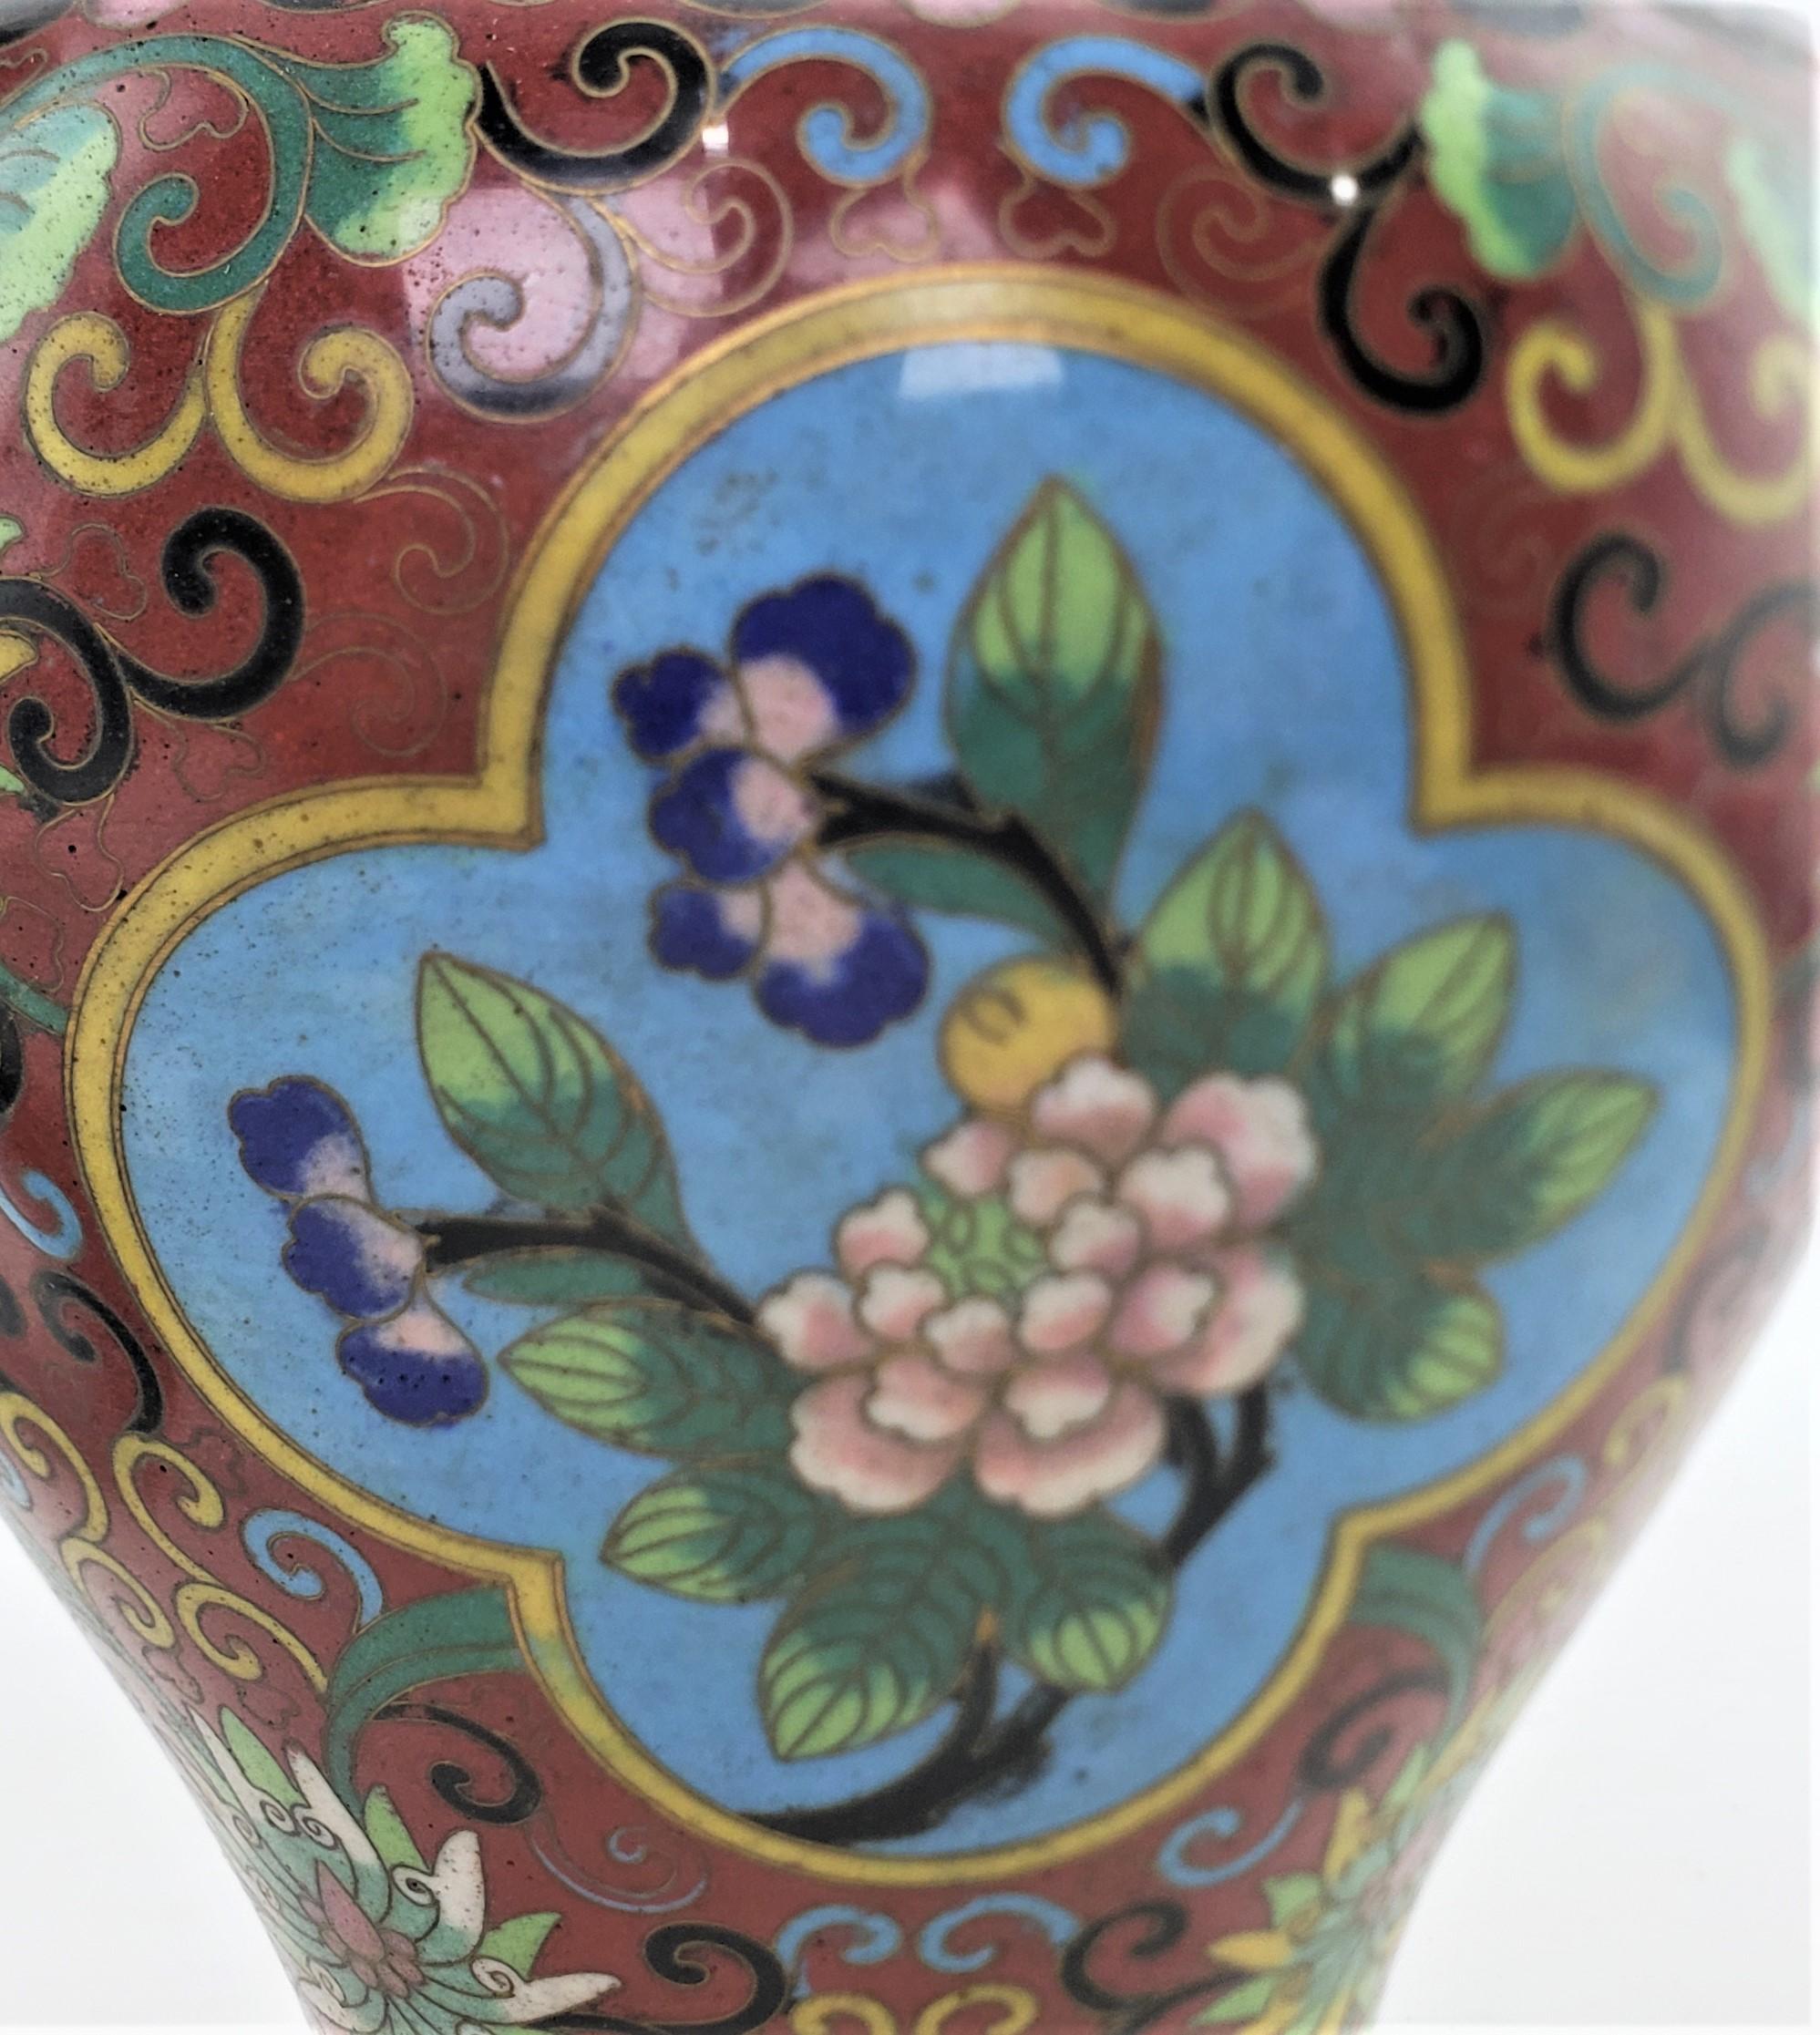 Pair of Early Chinese Republic Era Cloisonne Vases with Stylized Floral Motif For Sale 8